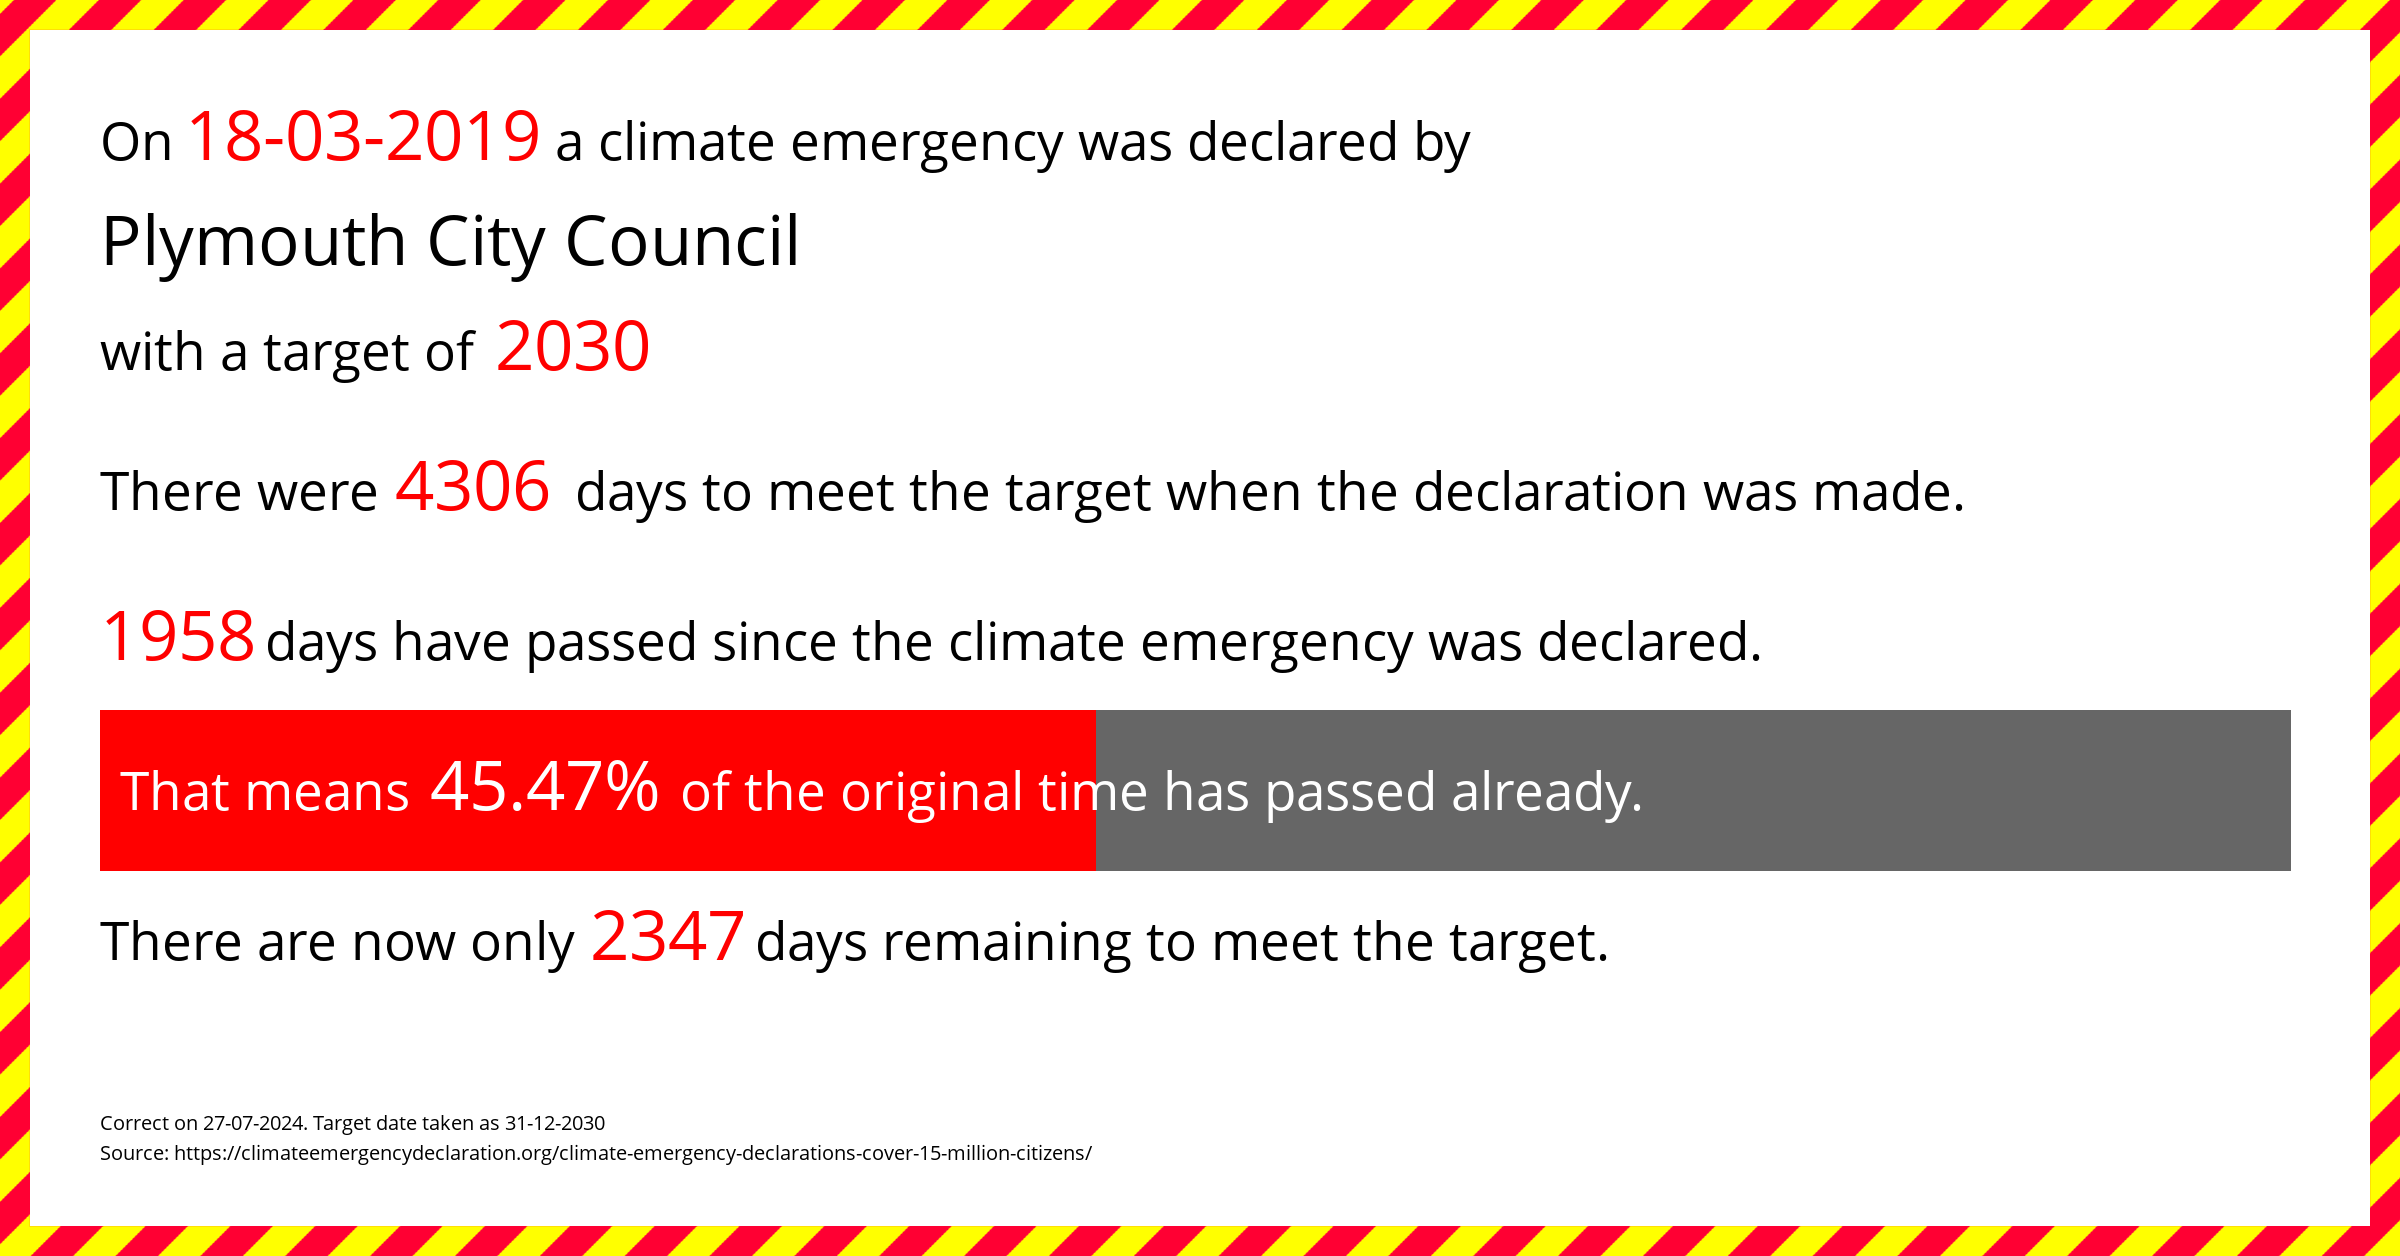 Plymouth City Council declared a Climate emergency on Monday 18th March 2019, with a target of 2030.